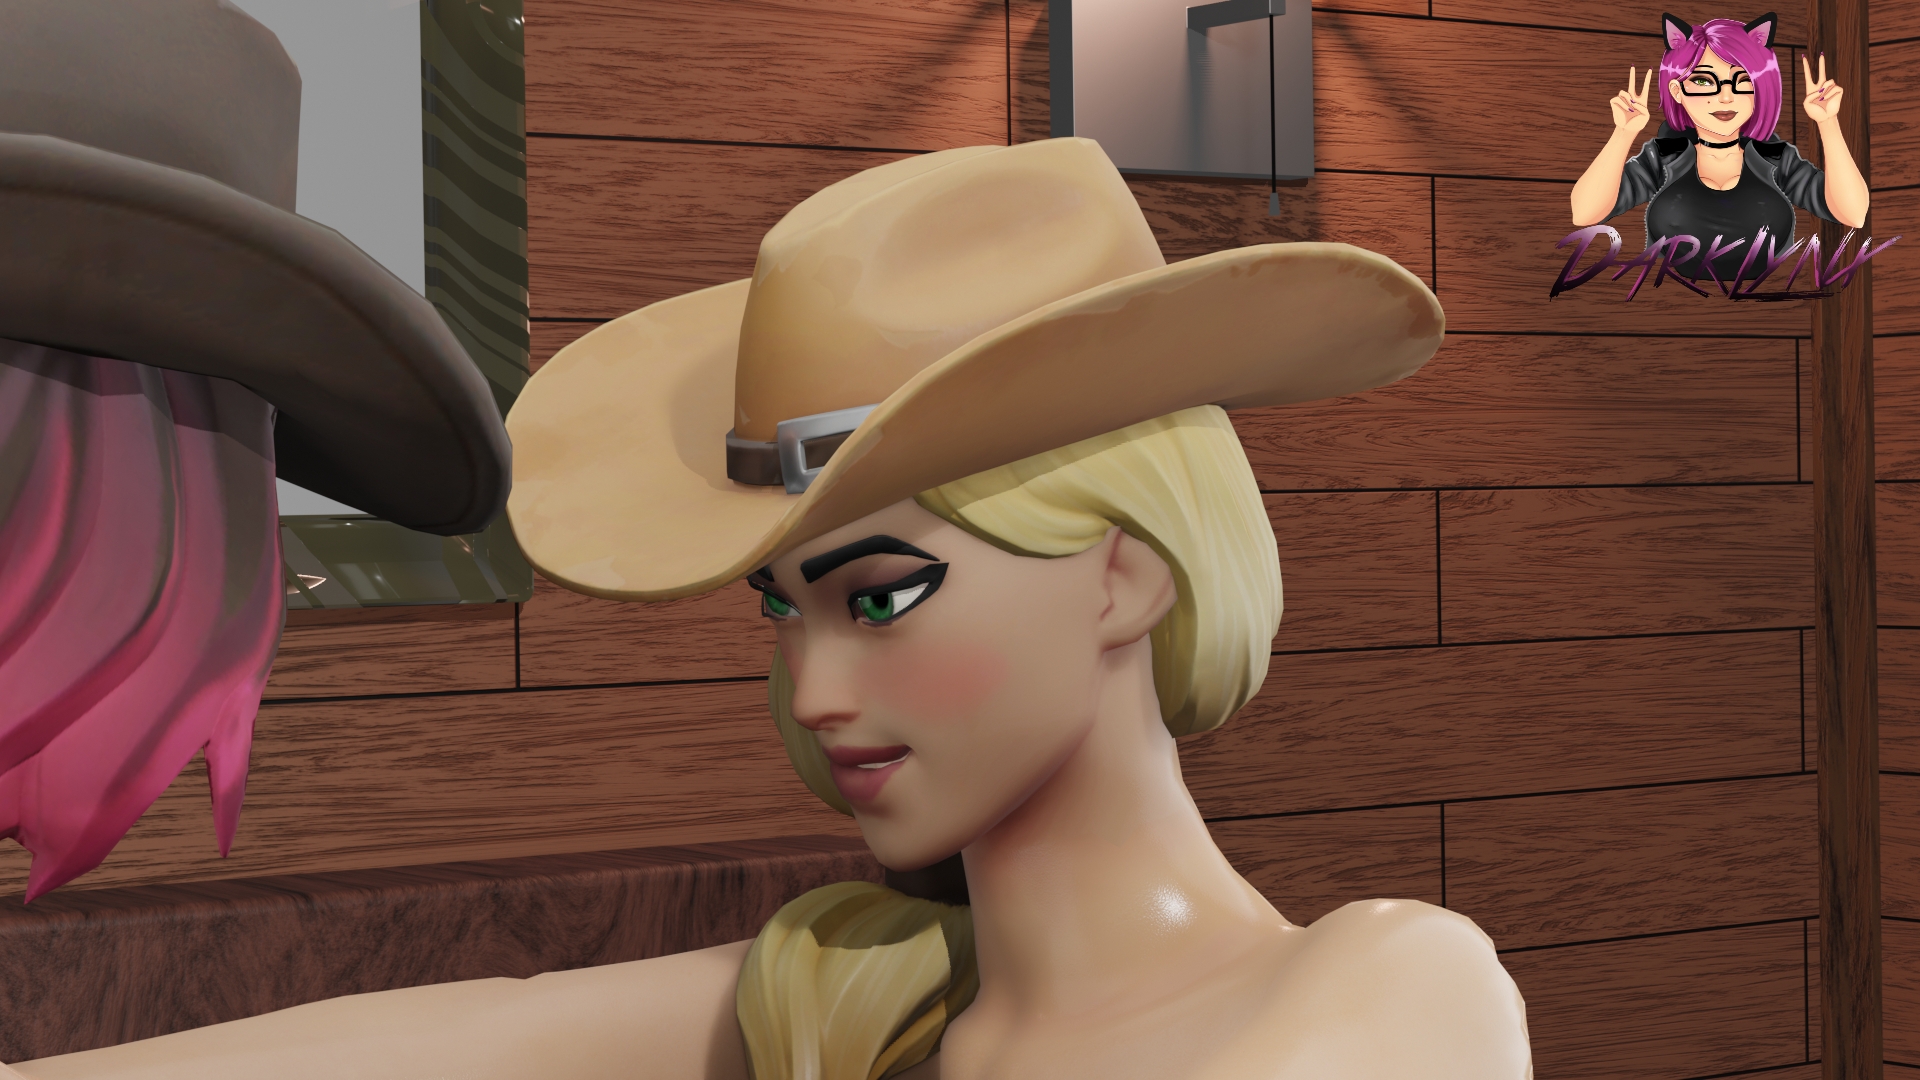 two naughty cowgirls Calamity (fortnite) Rustler Fortnite Sexy Hot In The Nude Oiled 2 Girls 3d Girls 3d Porn 3dnsfw Cowgirl 2